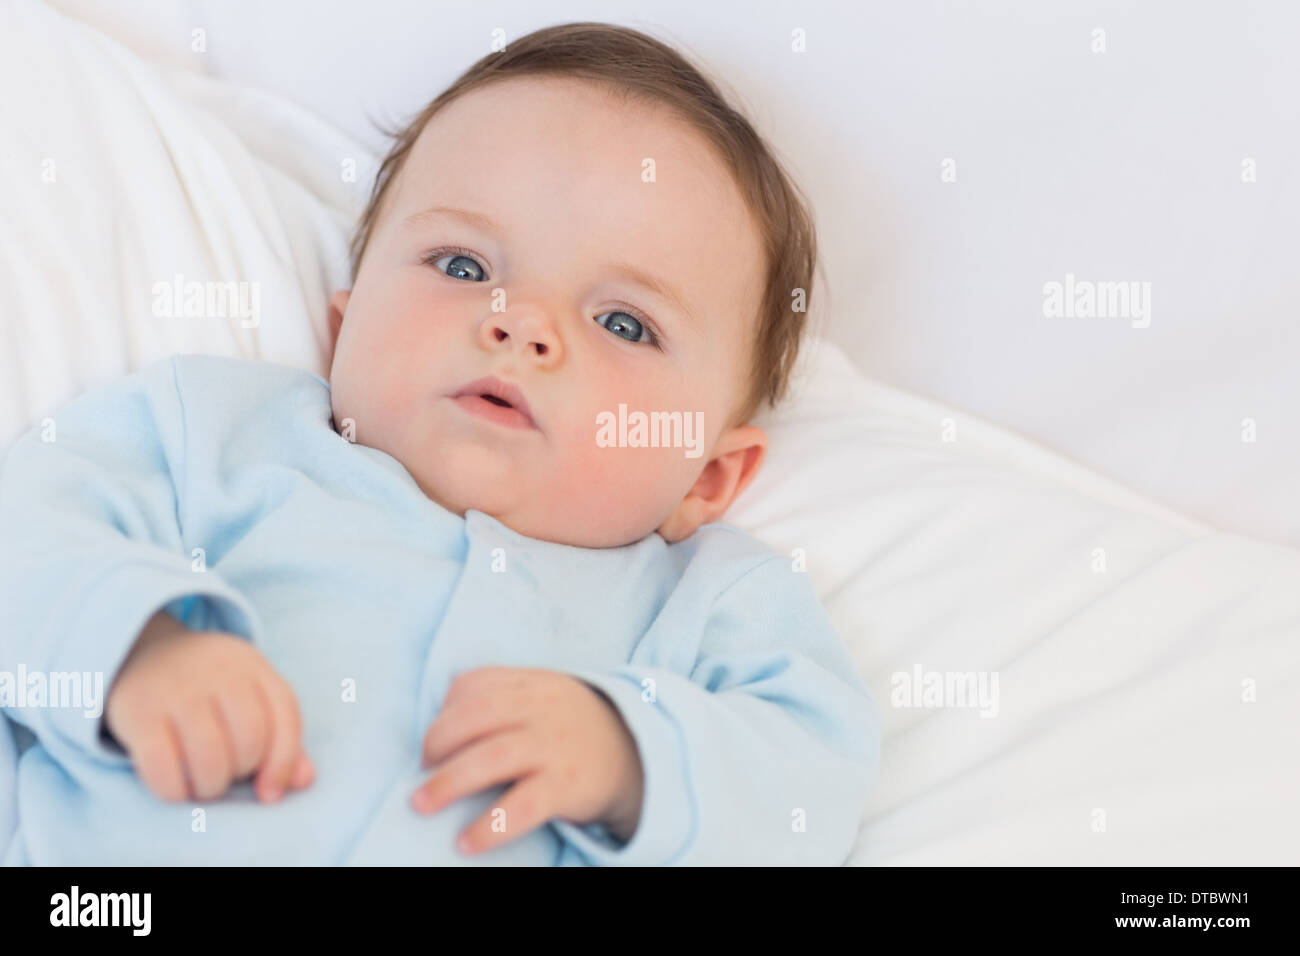 Portrait of adorable baby in bed Stock Photo